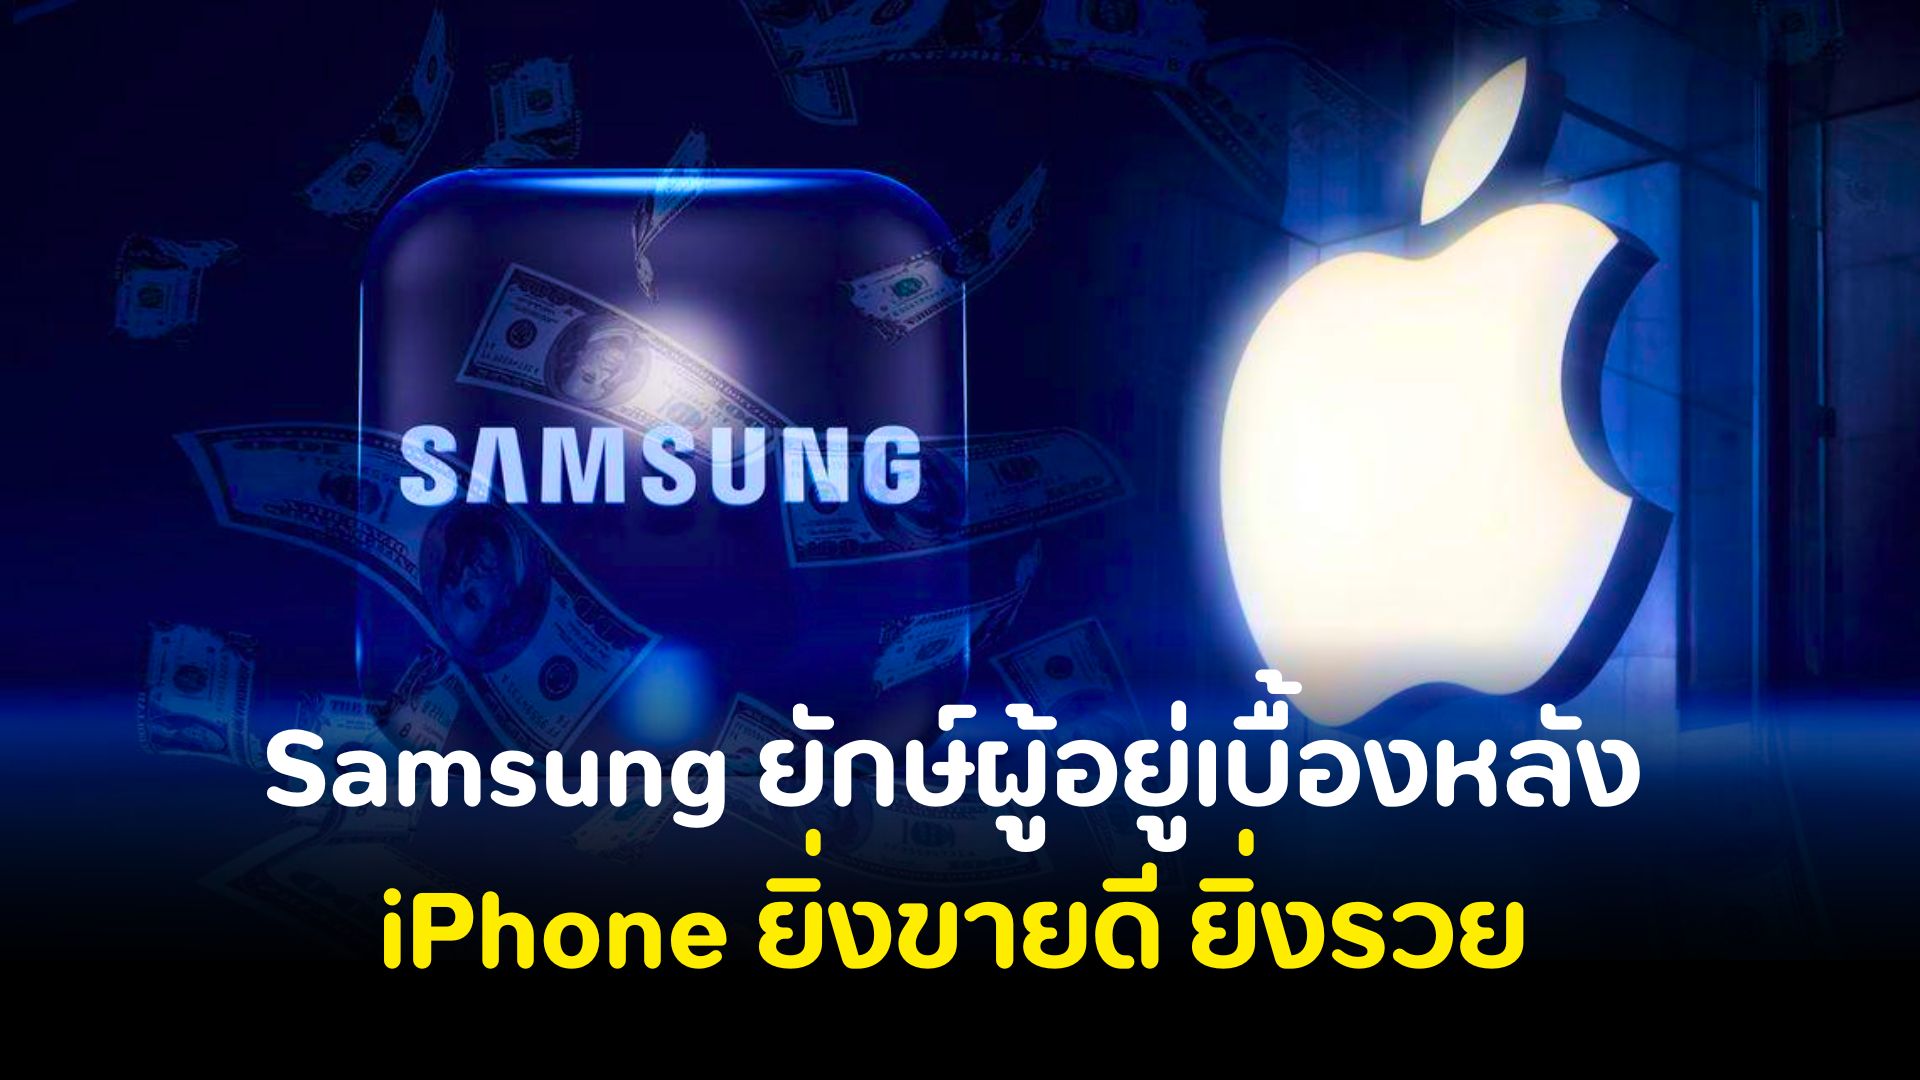 Samsung, the giant behind the iPhone, sells better and gets richer.